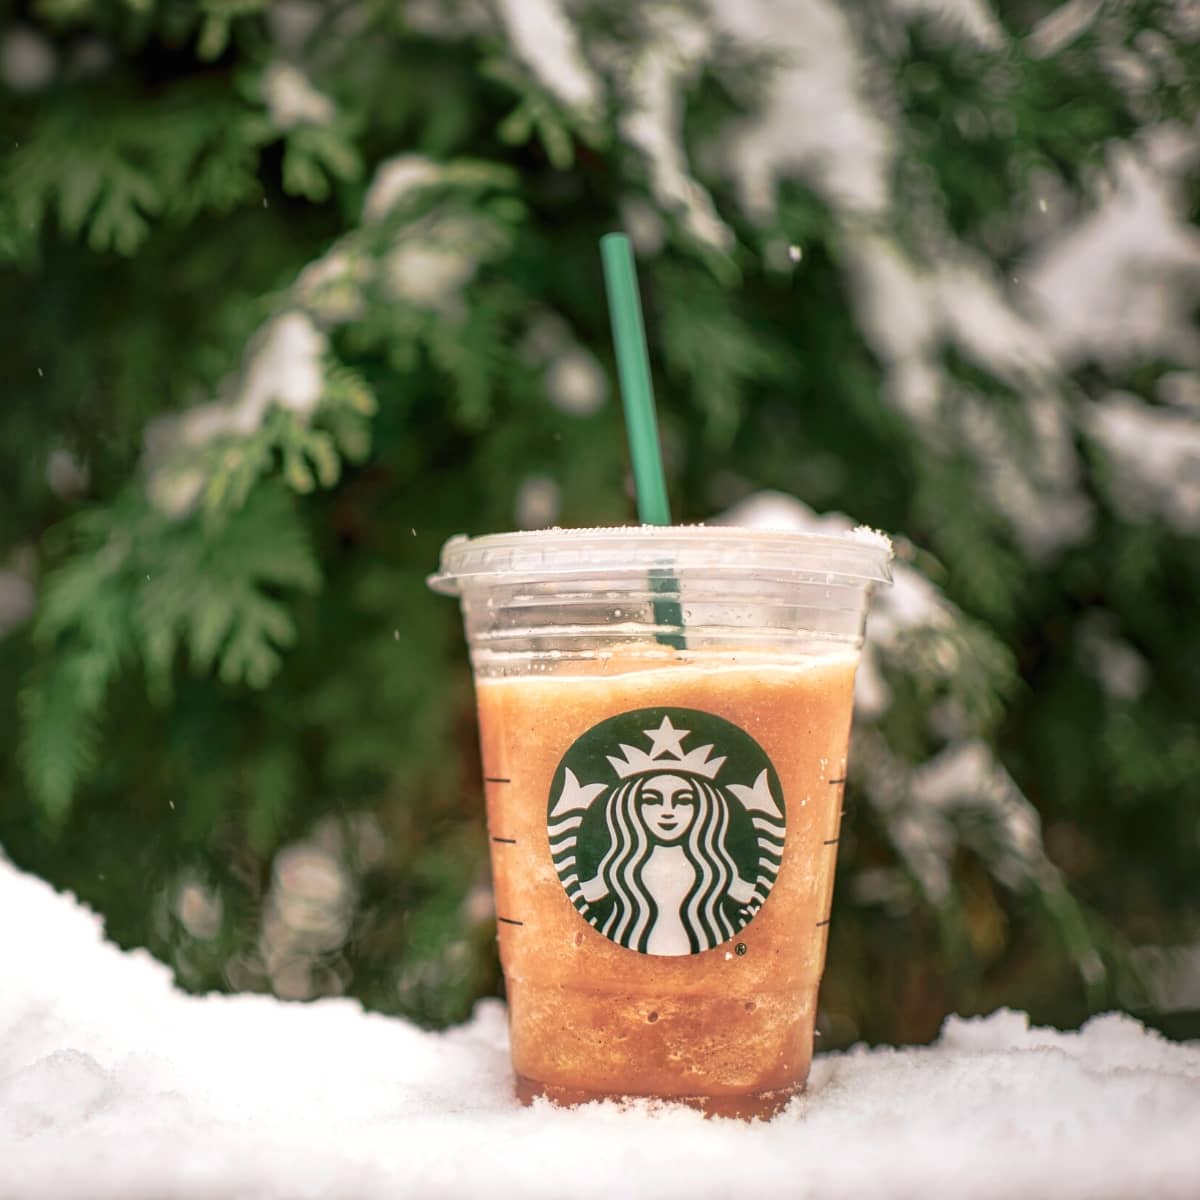 An iced Starbucks drink sitting in the snow.